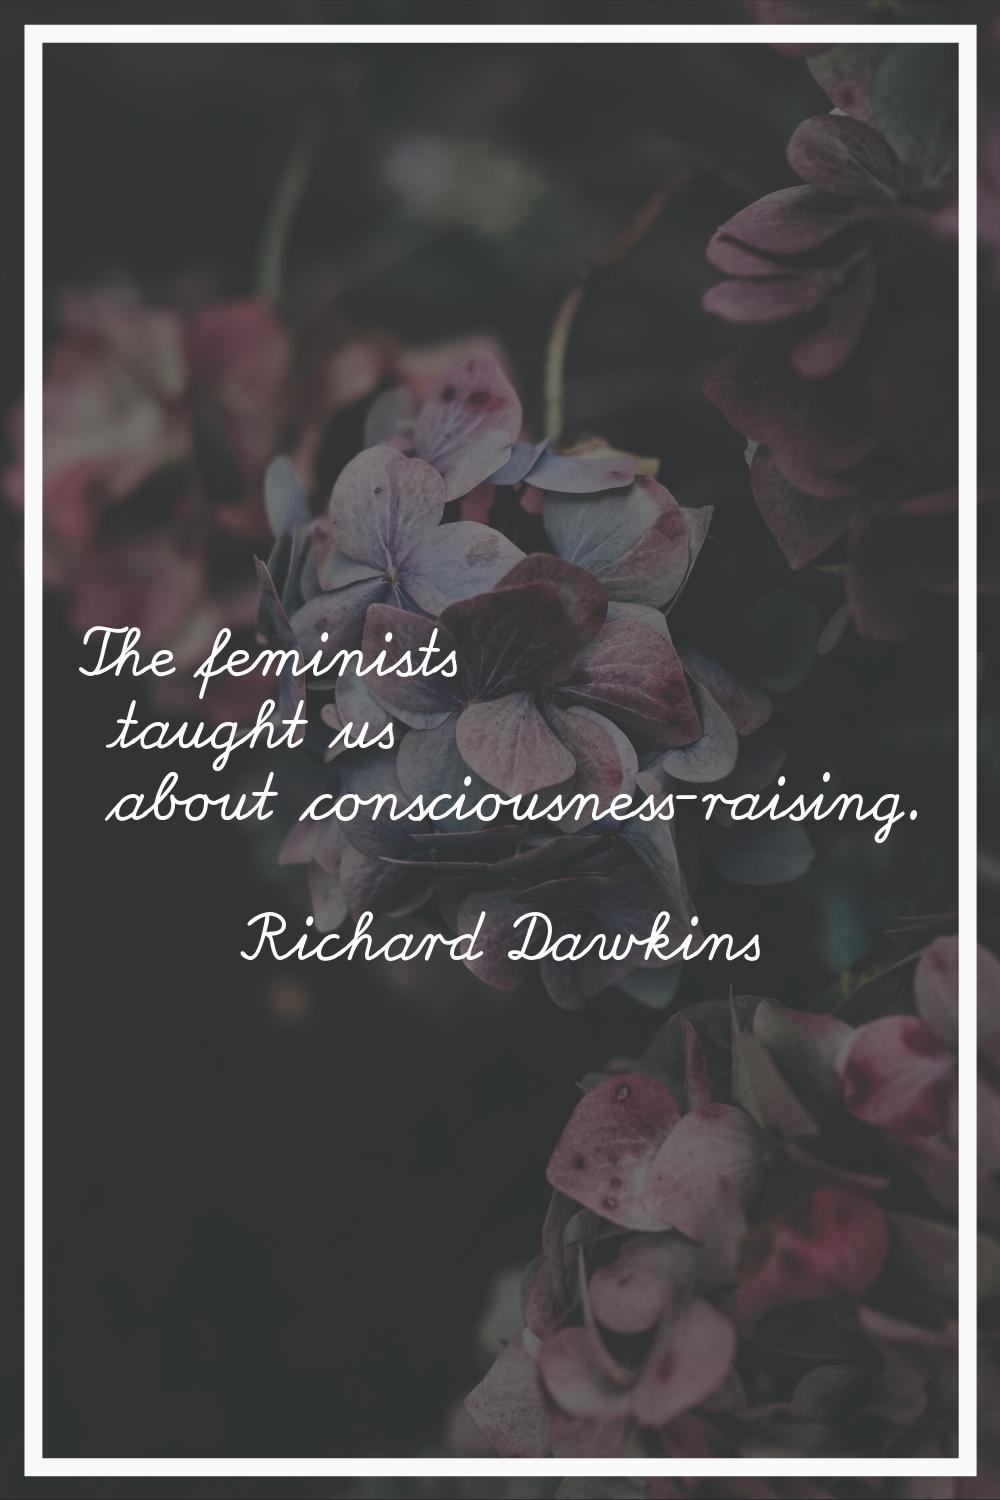 The feminists taught us about consciousness-raising.